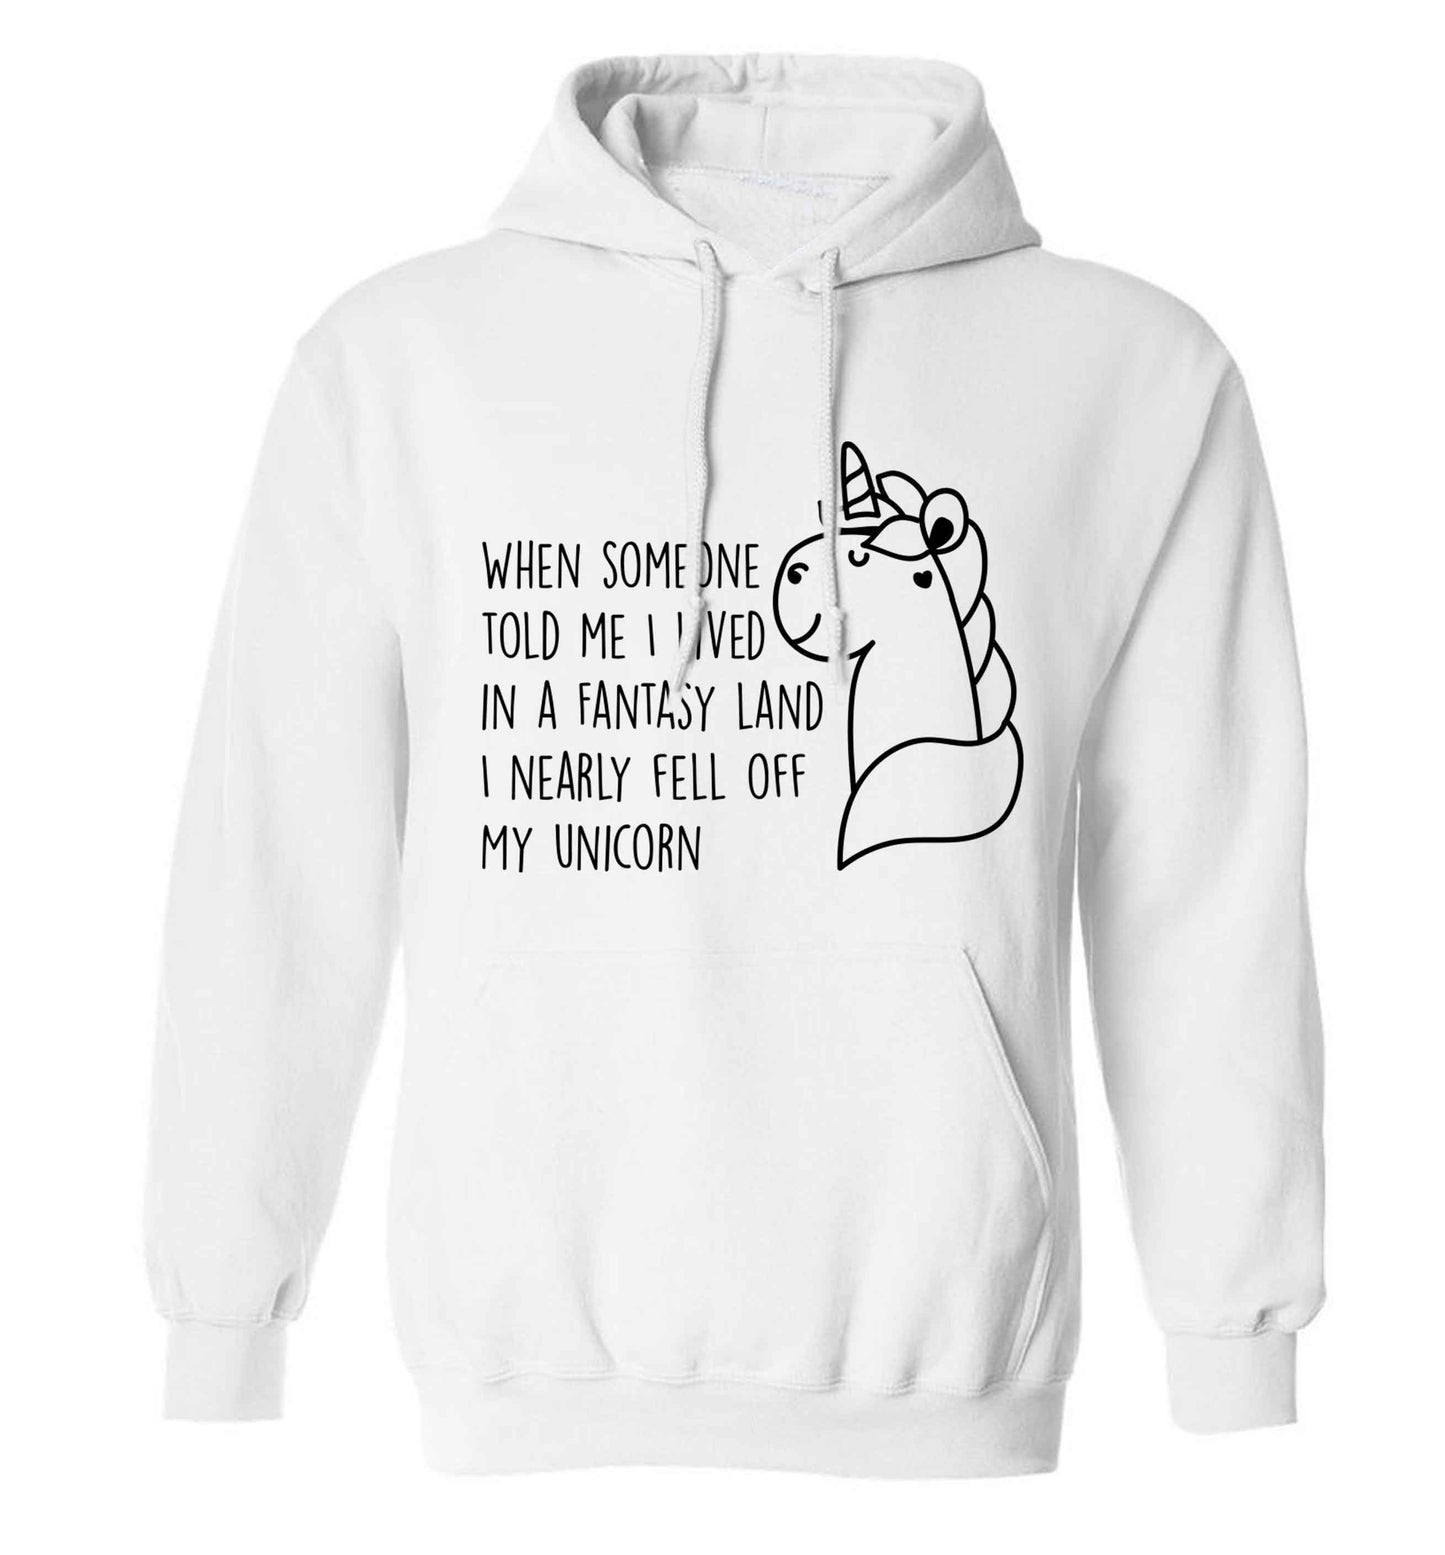 When somebody told me I lived in a fantasy land I nearly fell of my unicorn adults unisex white hoodie 2XL